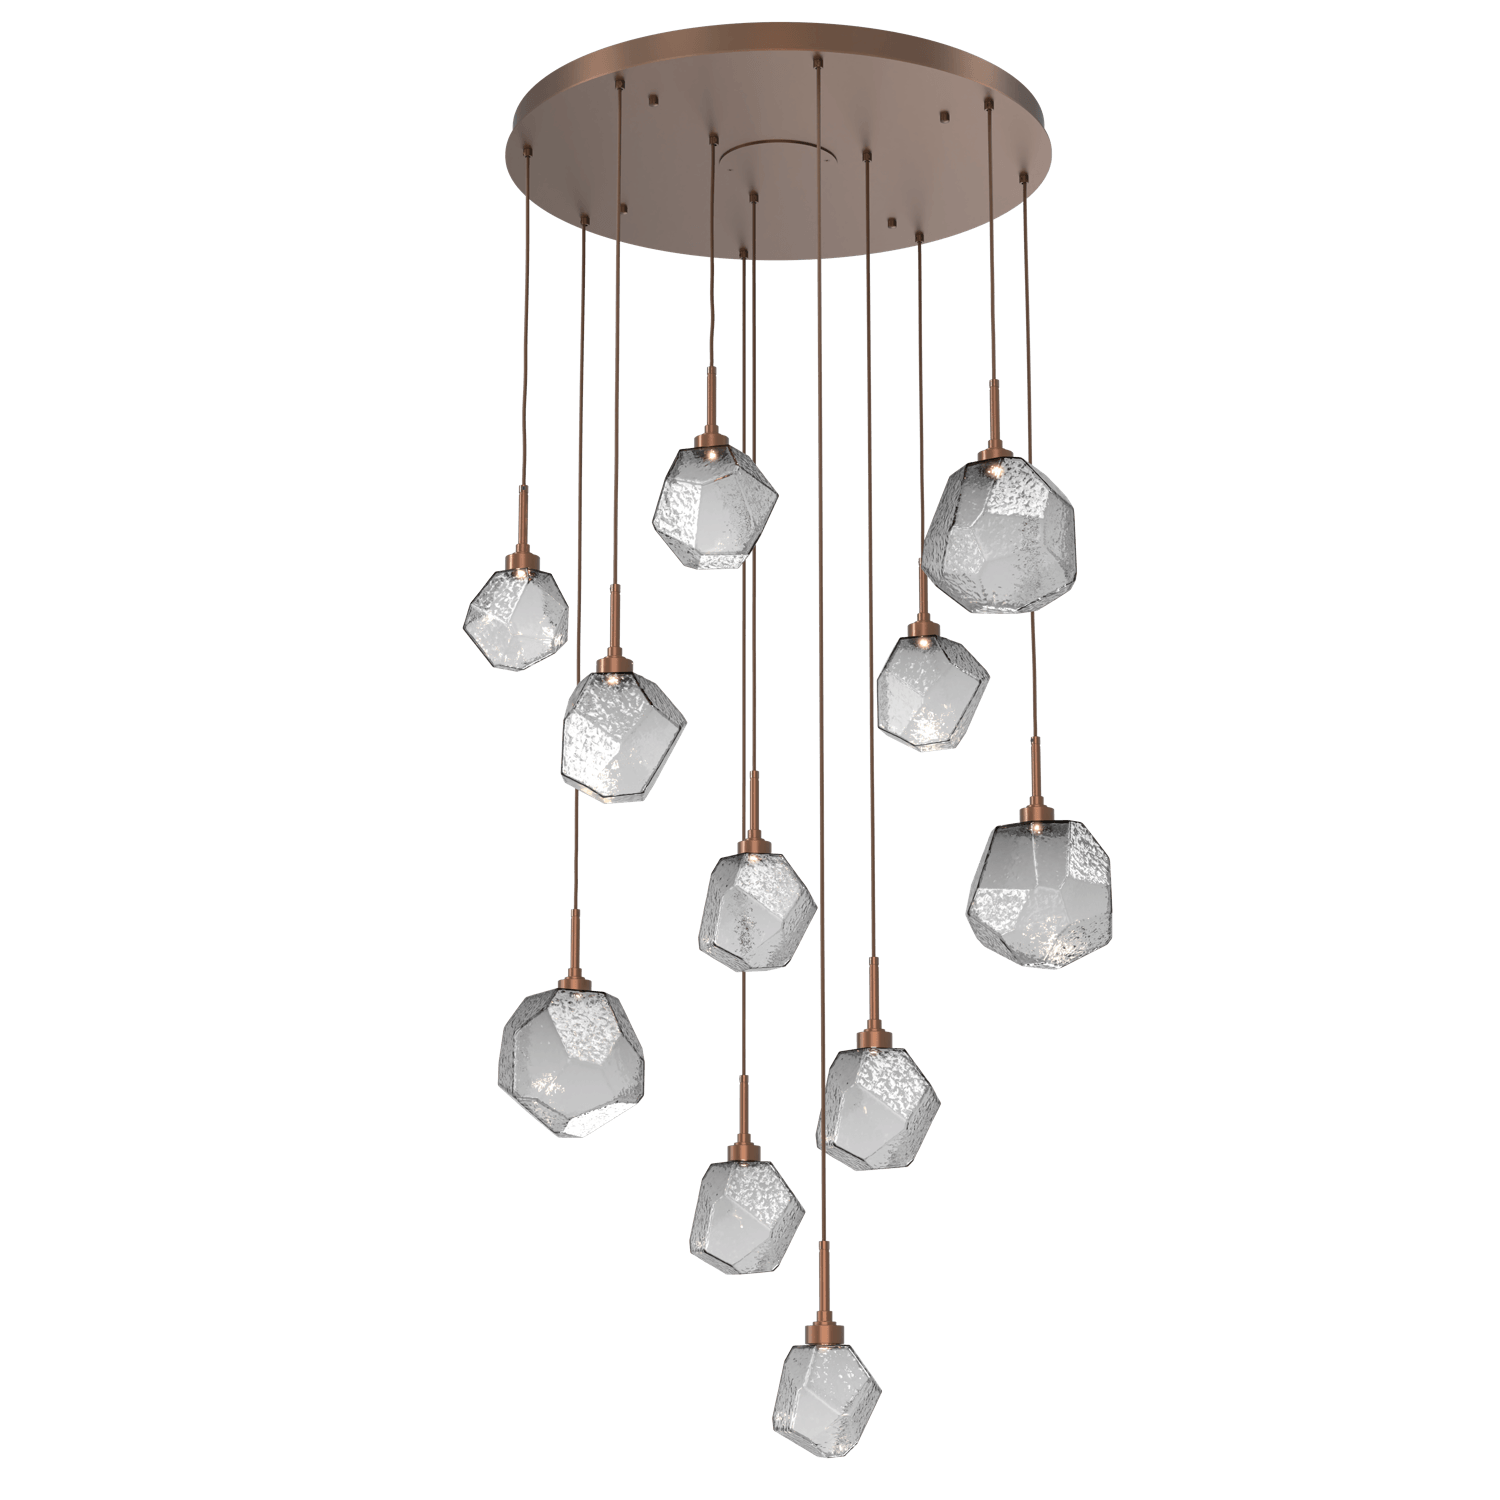 CHB0039-11-BB-S-Hammerton-Studio-Gem-11-light-round-pendant-chandelier-with-burnished-bronze-finish-and-smoke-blown-glass-shades-and-LED-lamping